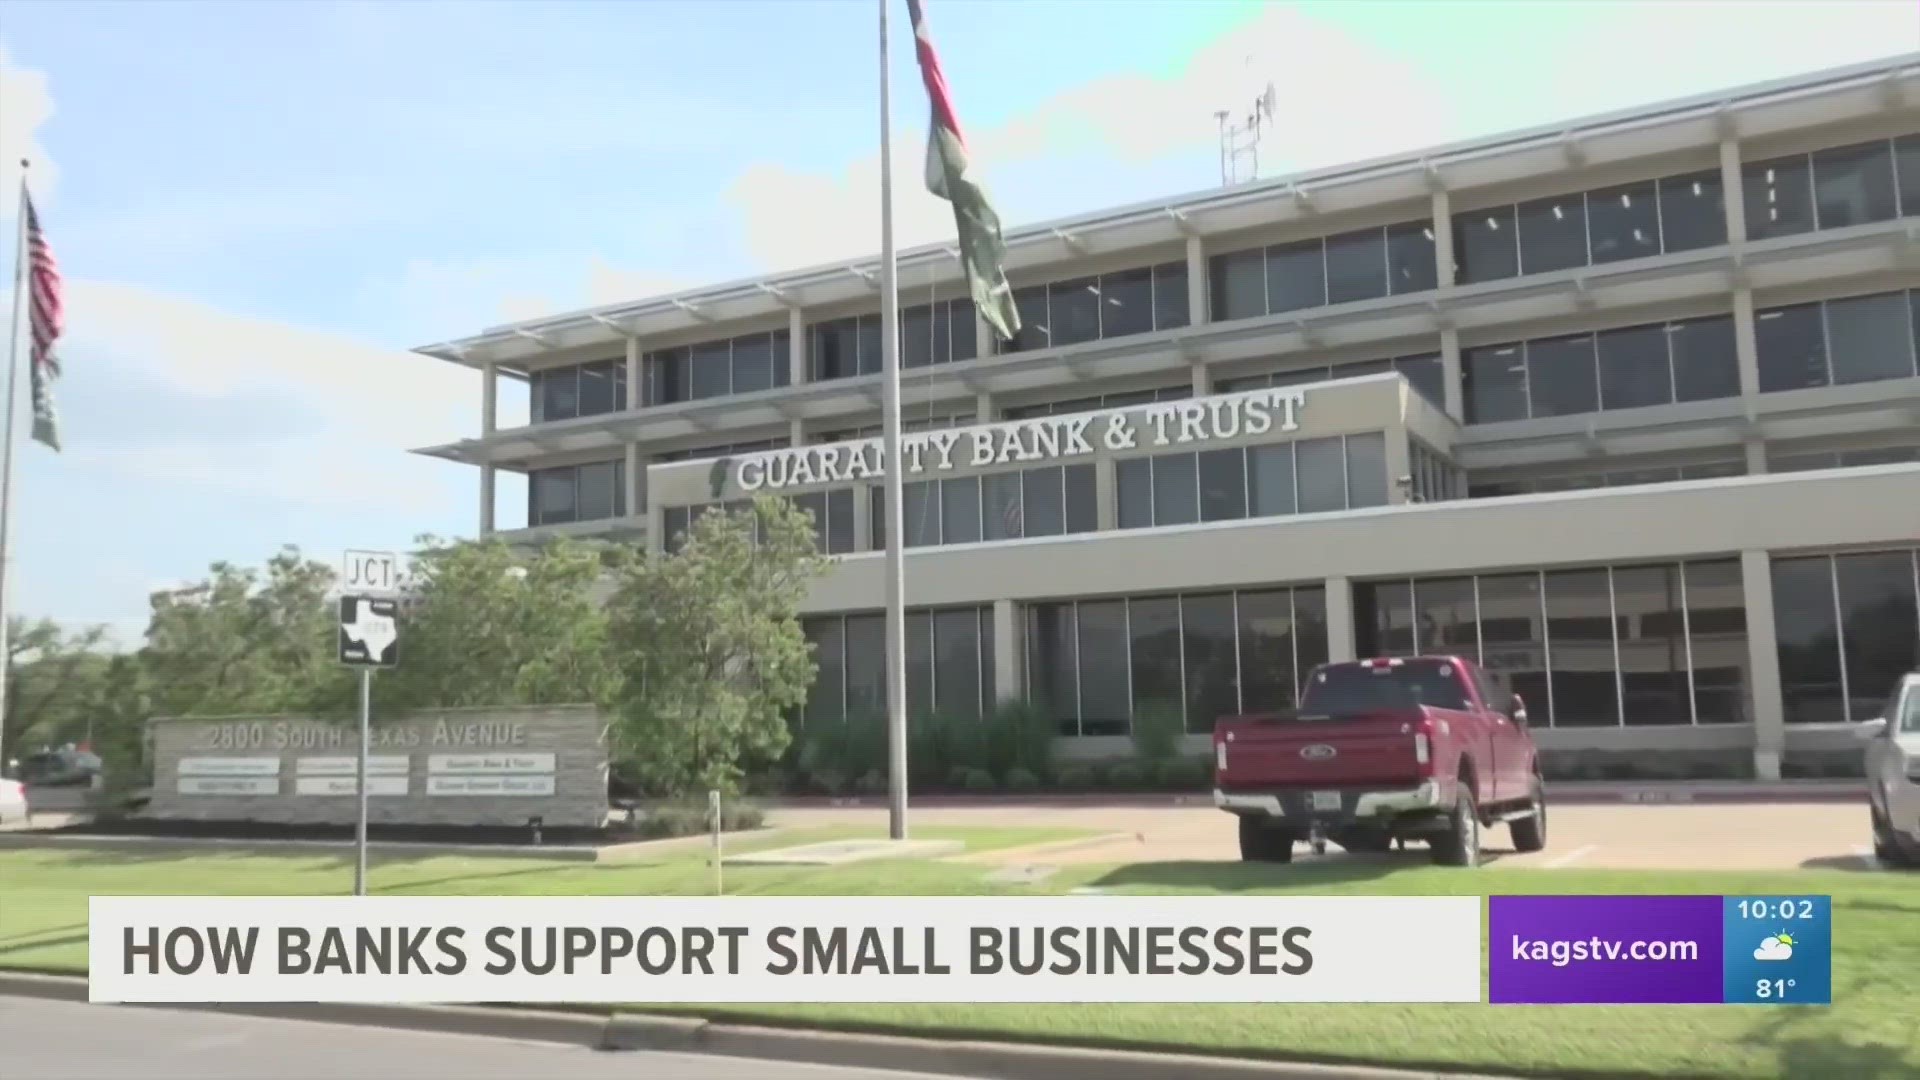 April 30 to May 6 is Small Business Week in Texas. A local Vice President of Guaranty Bank & Trust shared how local banks are the cornerstone of small business.